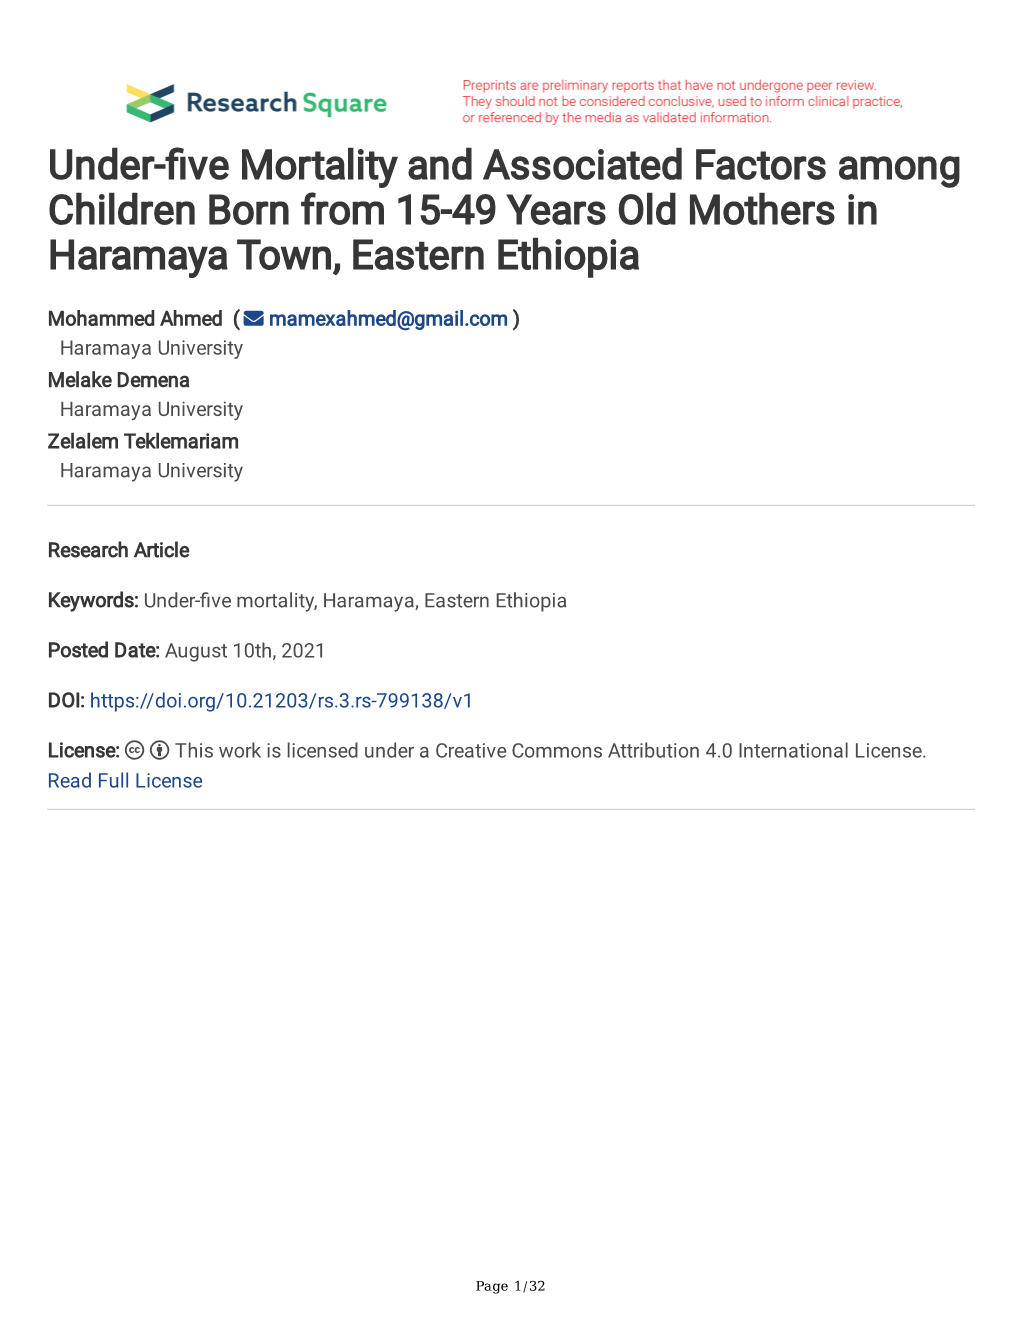 Ve Mortality and Associated Factors Among Children Born from 15-49 Years Old Mothers in Haramaya Town, Eastern Ethiopia